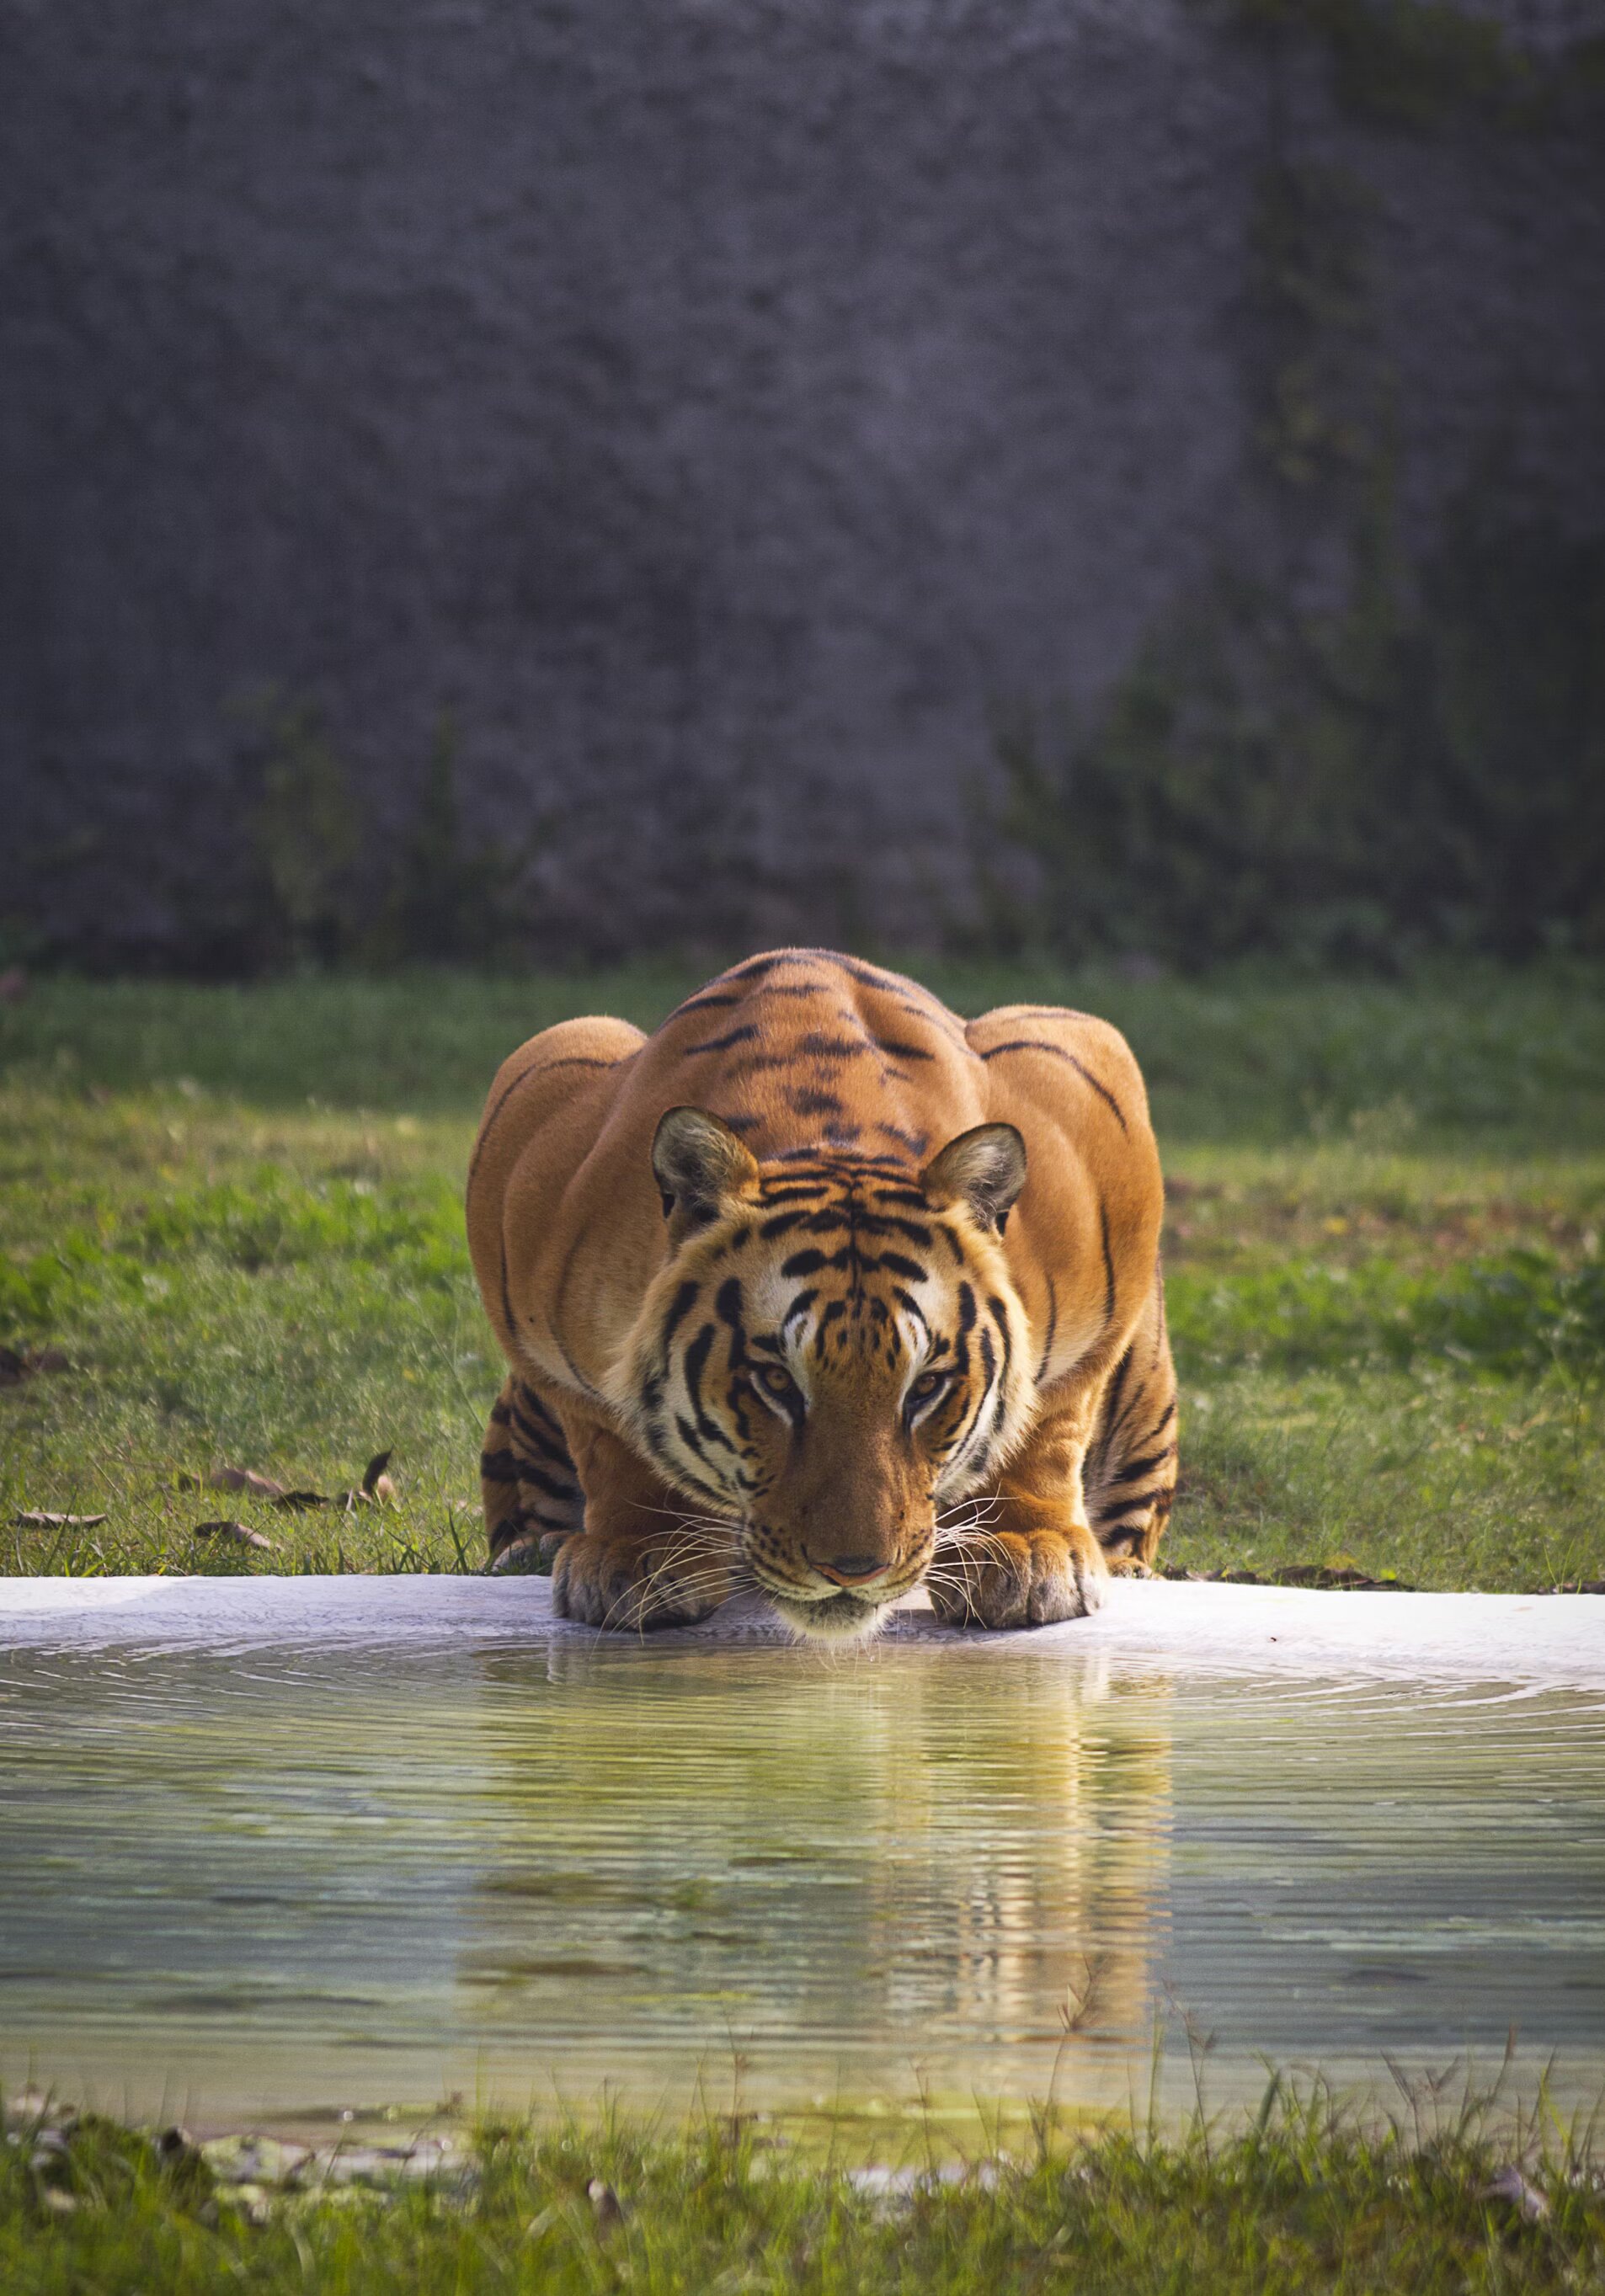 A majestic tiger quenches its thirst by drinking water from a serene pond in the wilderness.